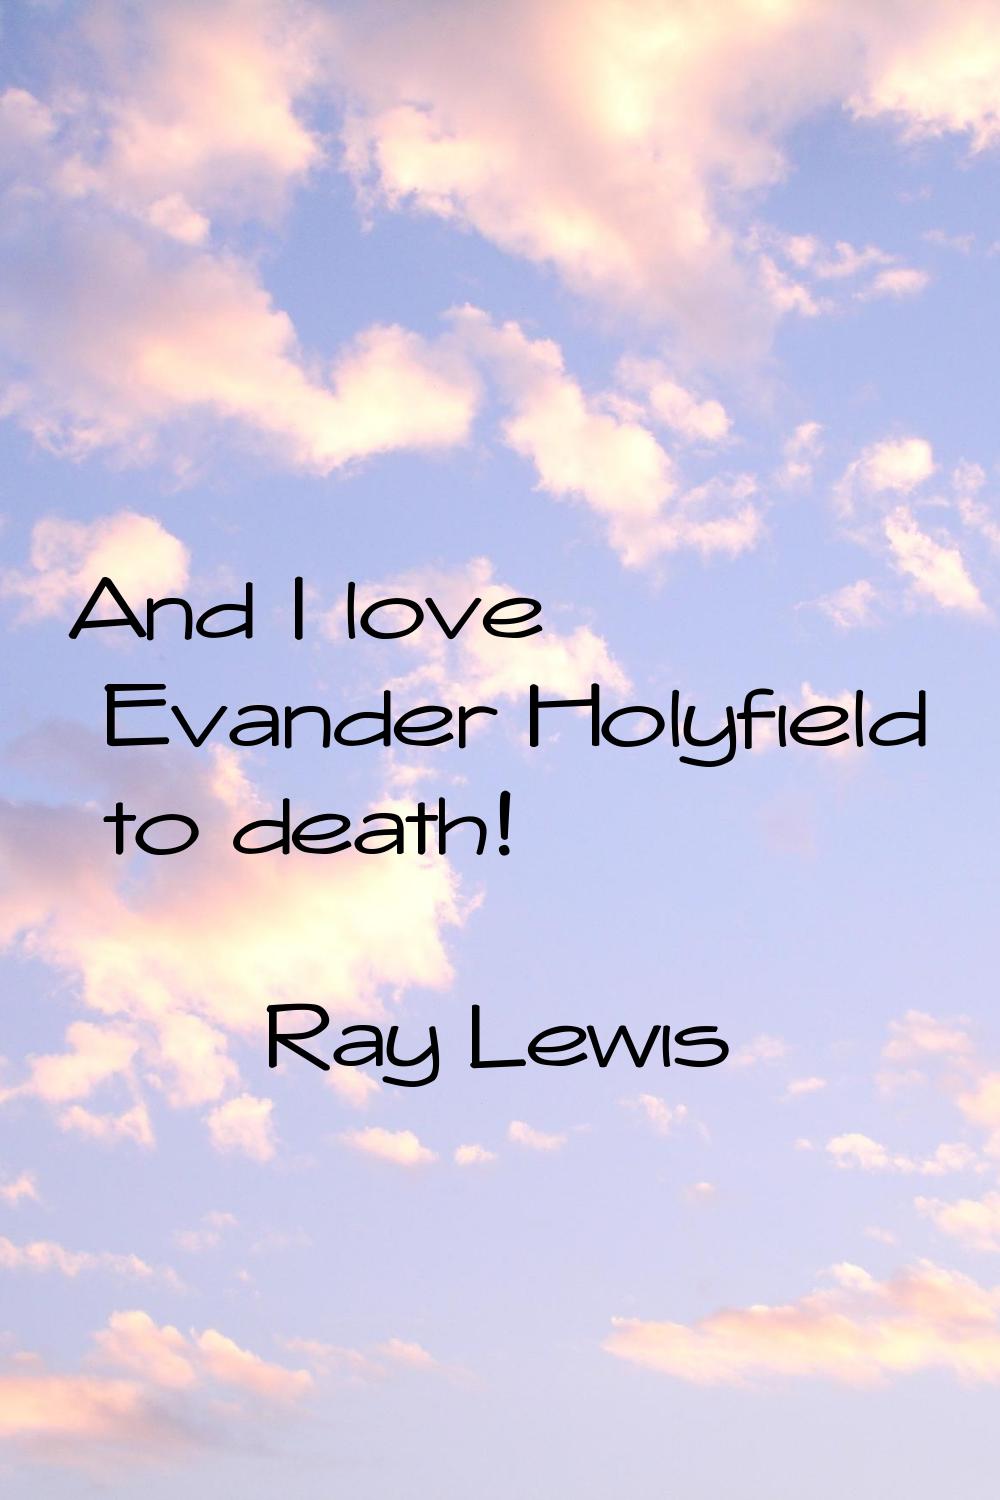 And I love Evander Holyfield to death!